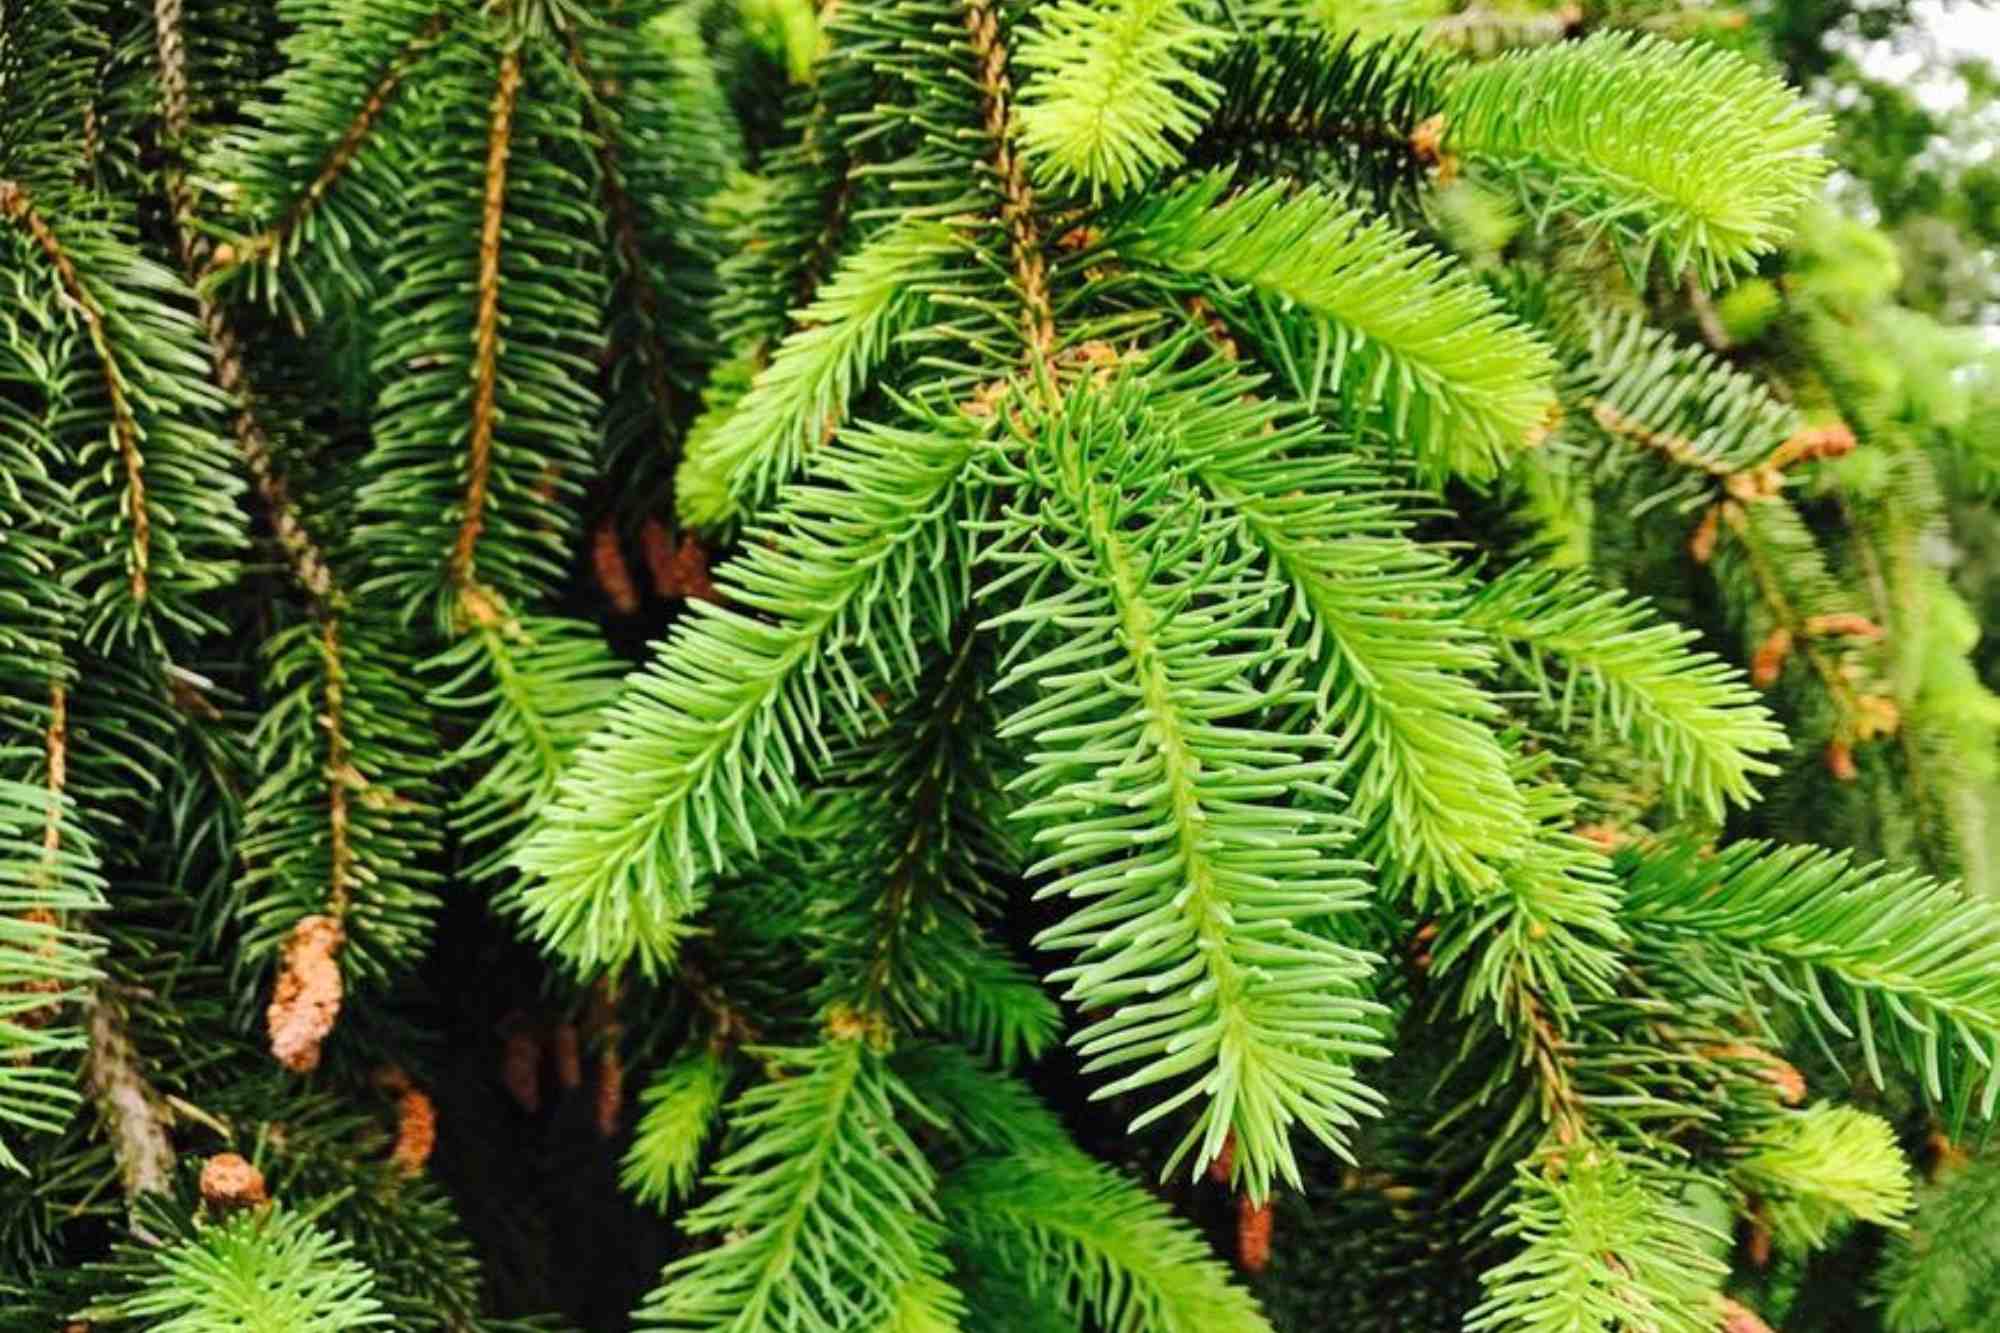 How Green Pine Tree Service Can Make Your Yard the Most Beautiful in the Neighborhood